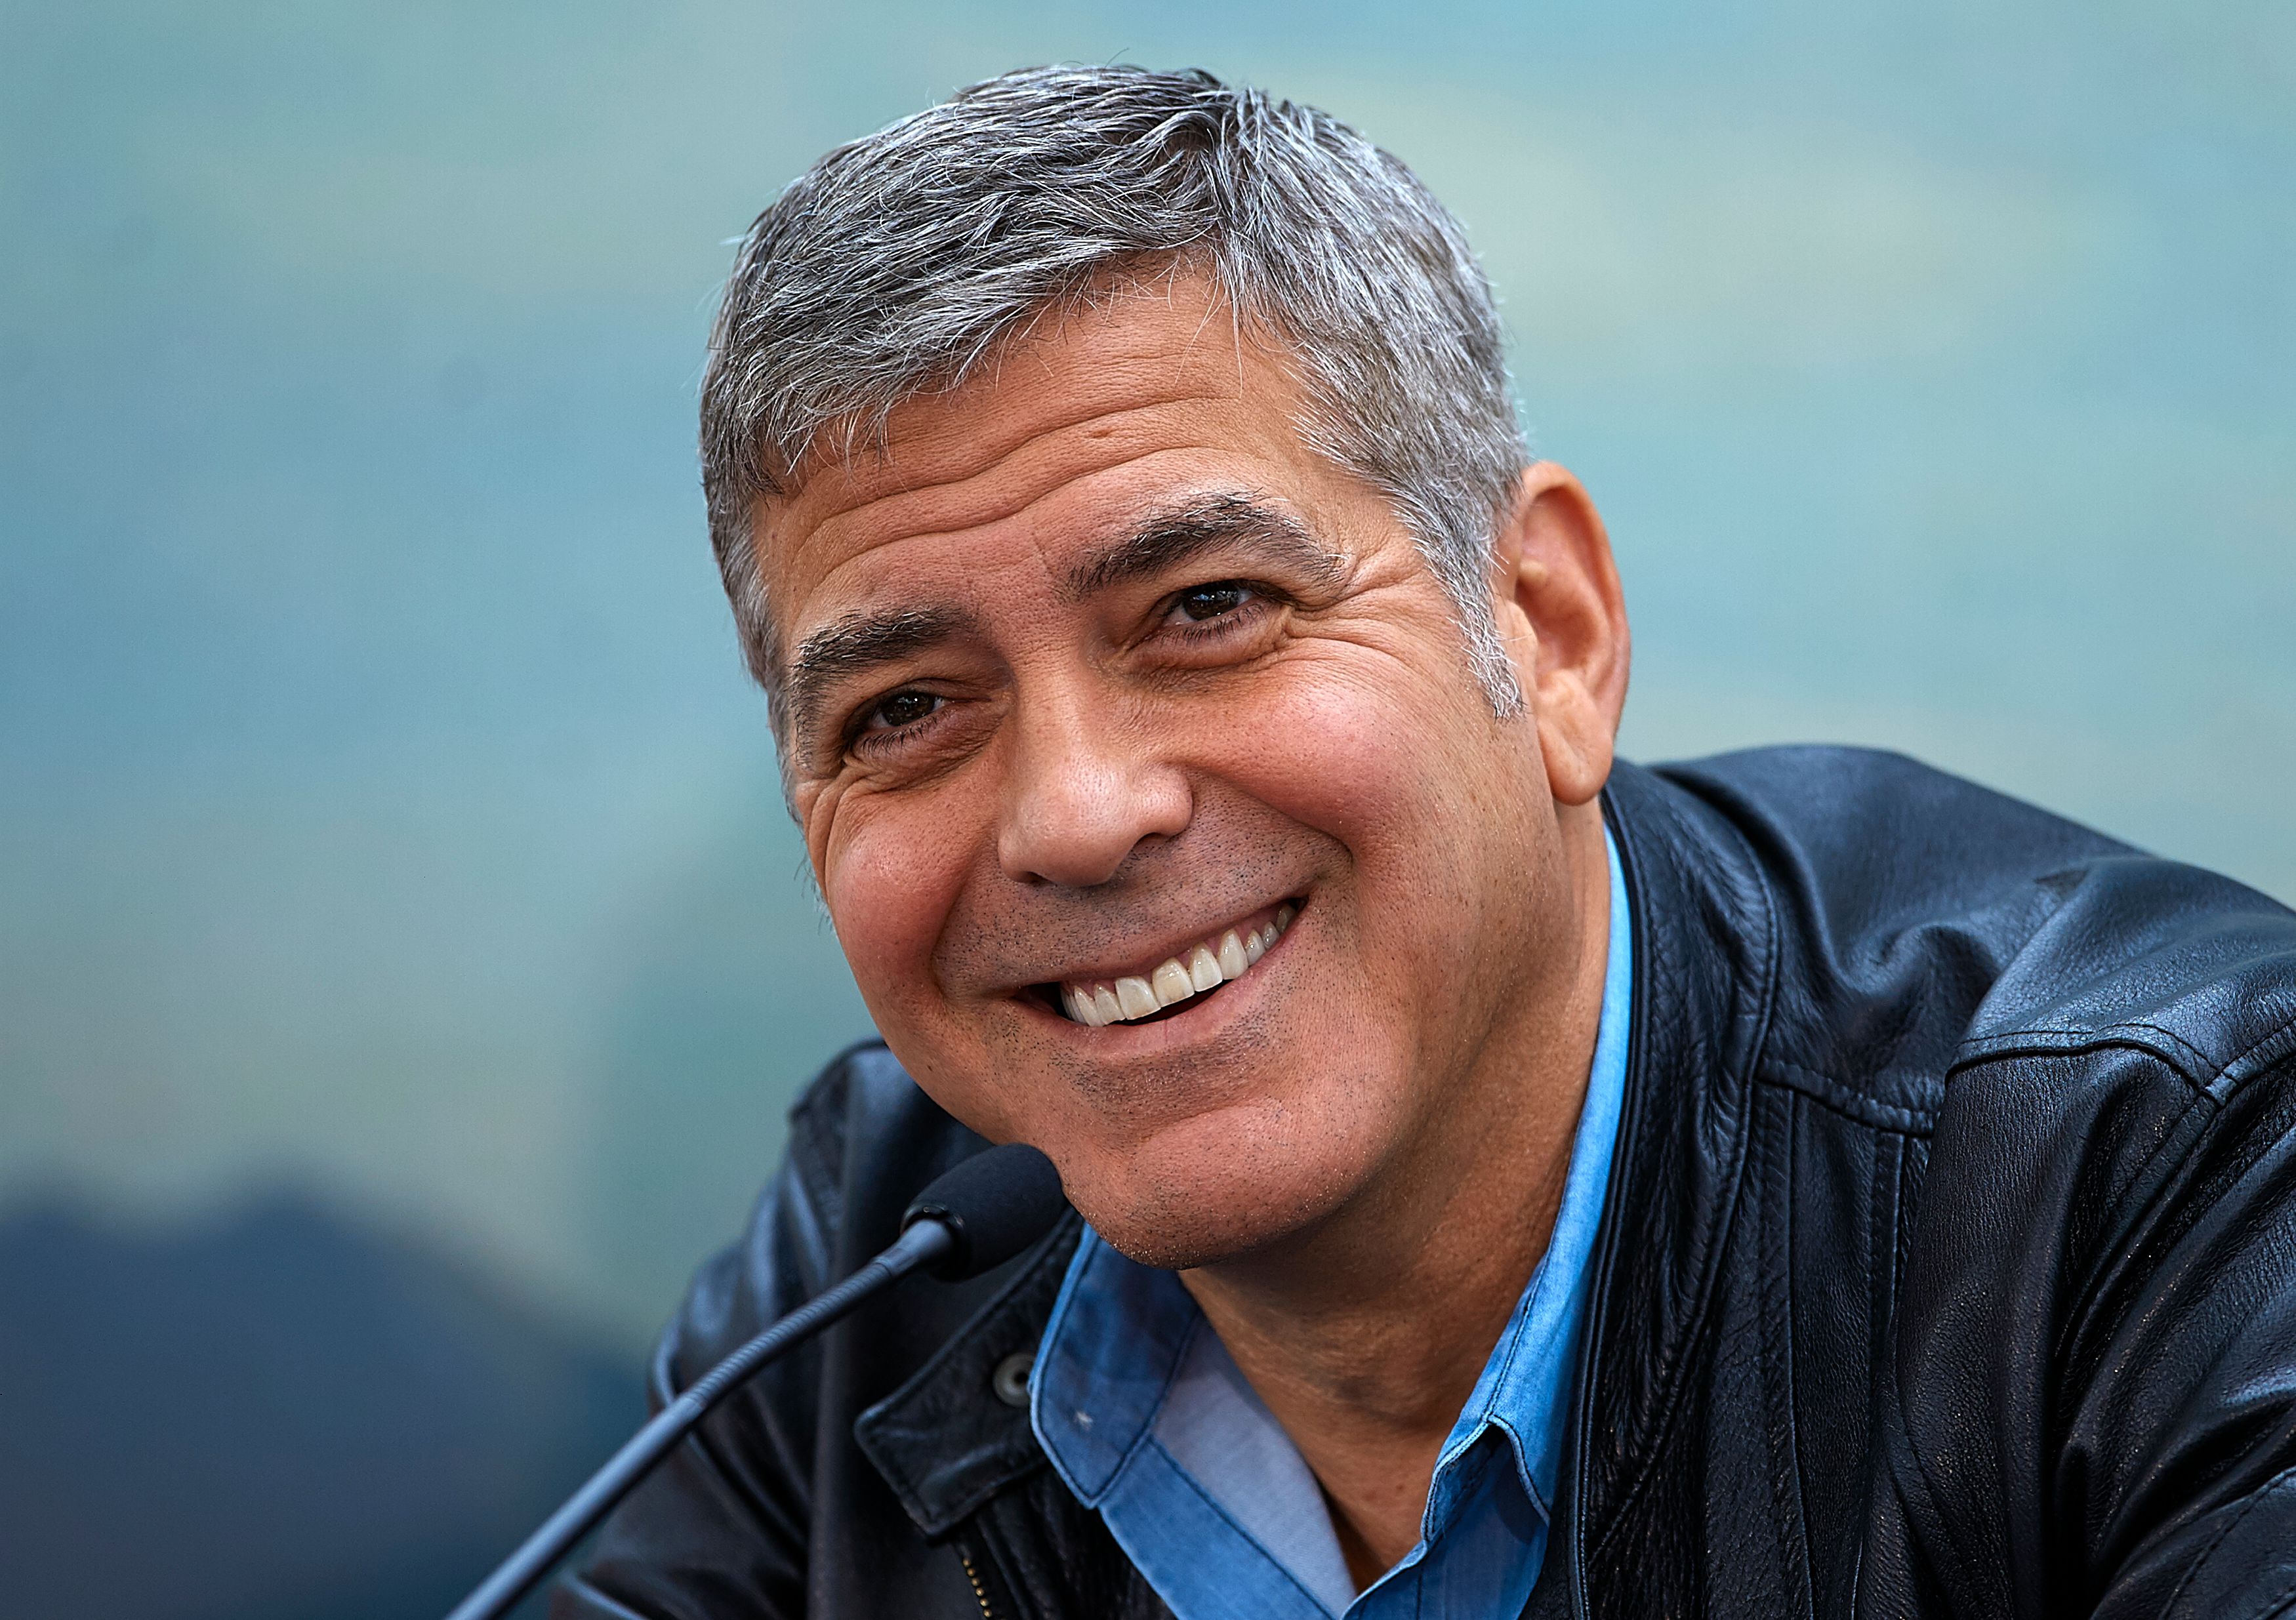 George Clooney at at the 'Tomorrowland' Press Conference at the L'Hemisferic on May 19, 2015 | Photo: Getty Images